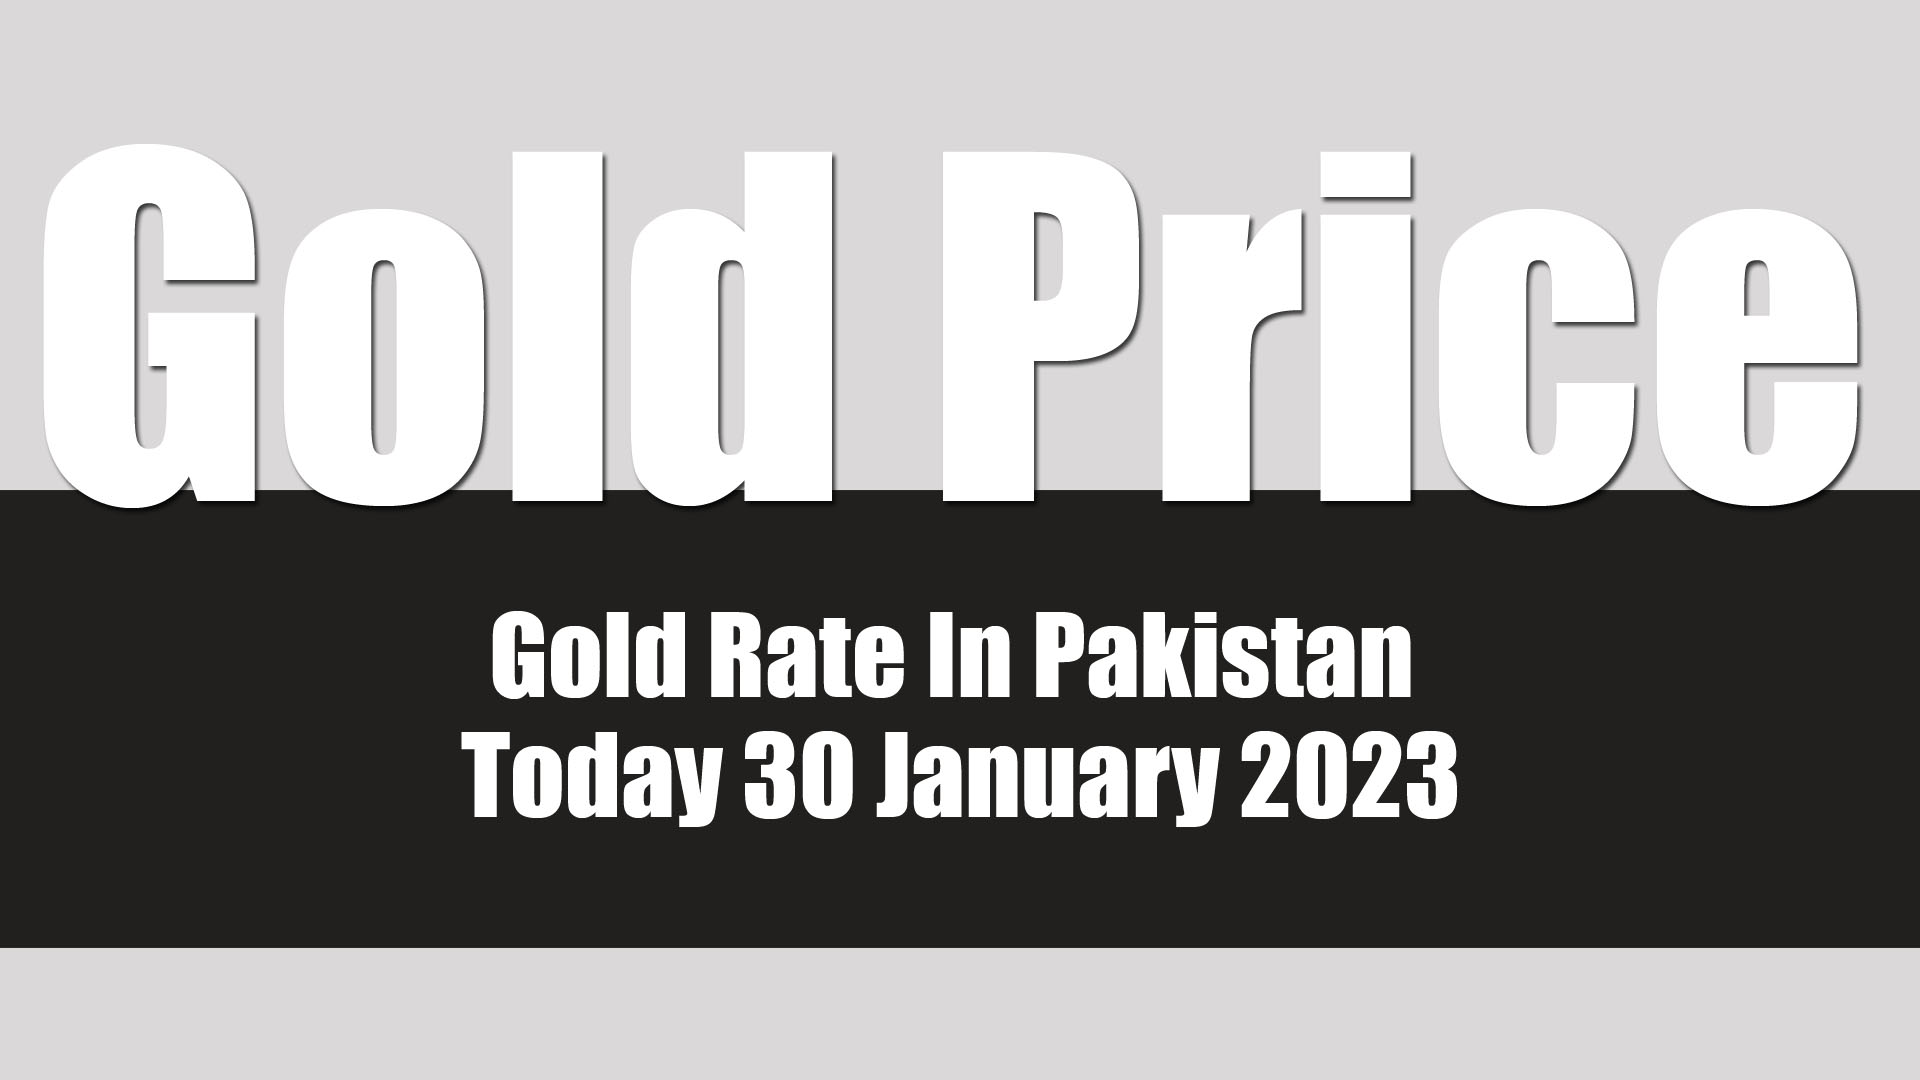 Gold Rate In Pakistan Today 30 January 2023 (Gold Price)